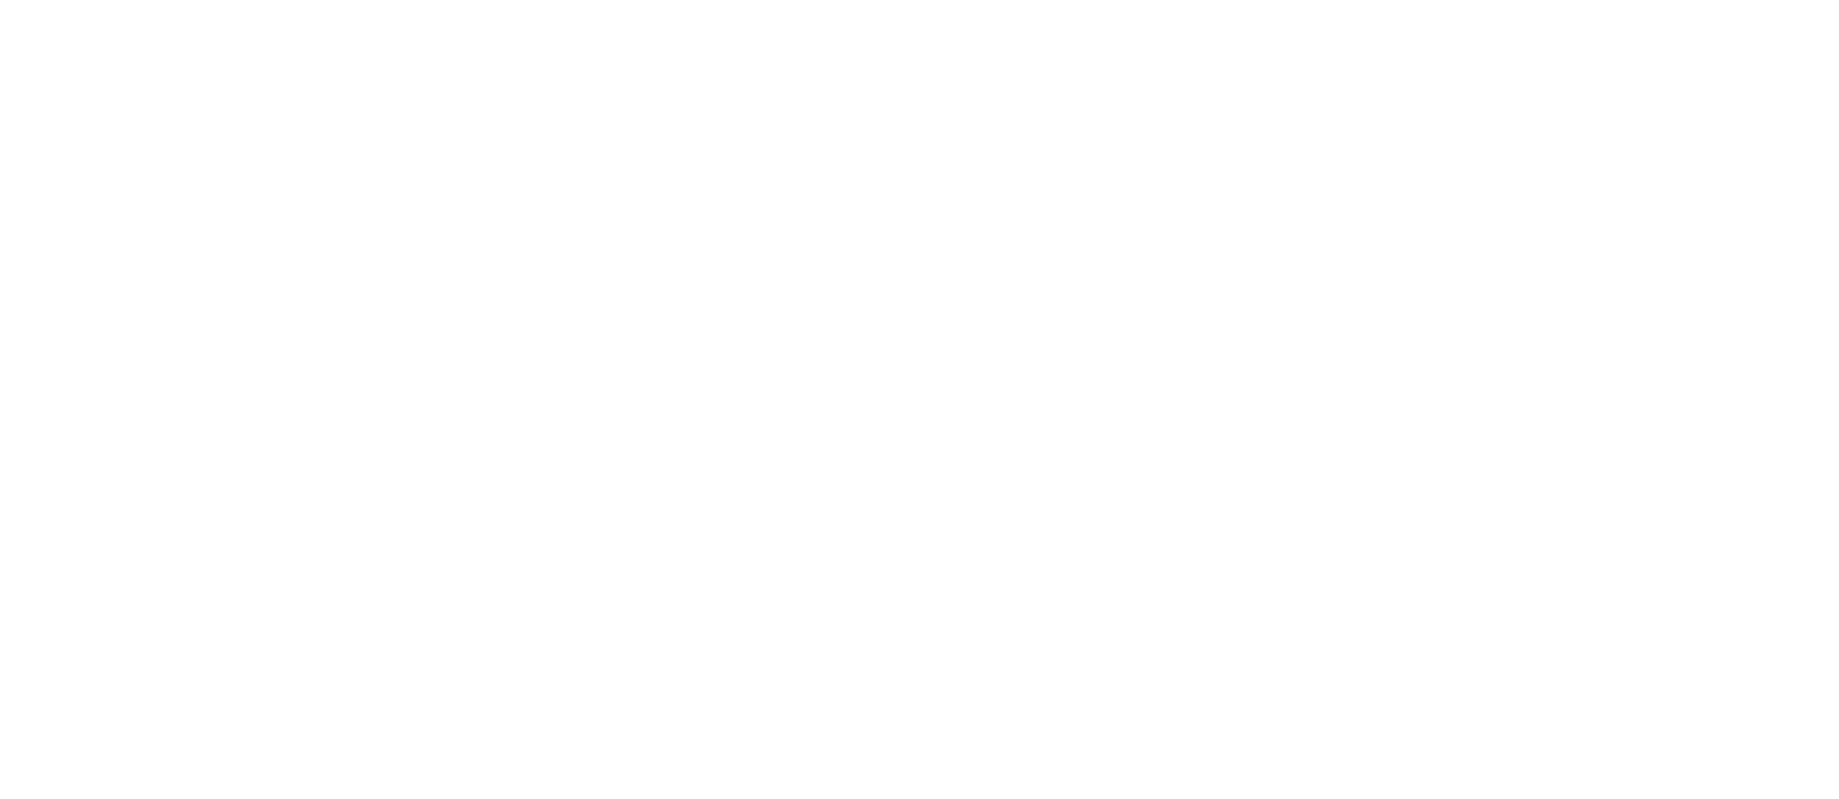 National Library of Medicine and All of Us cobranded logo in white